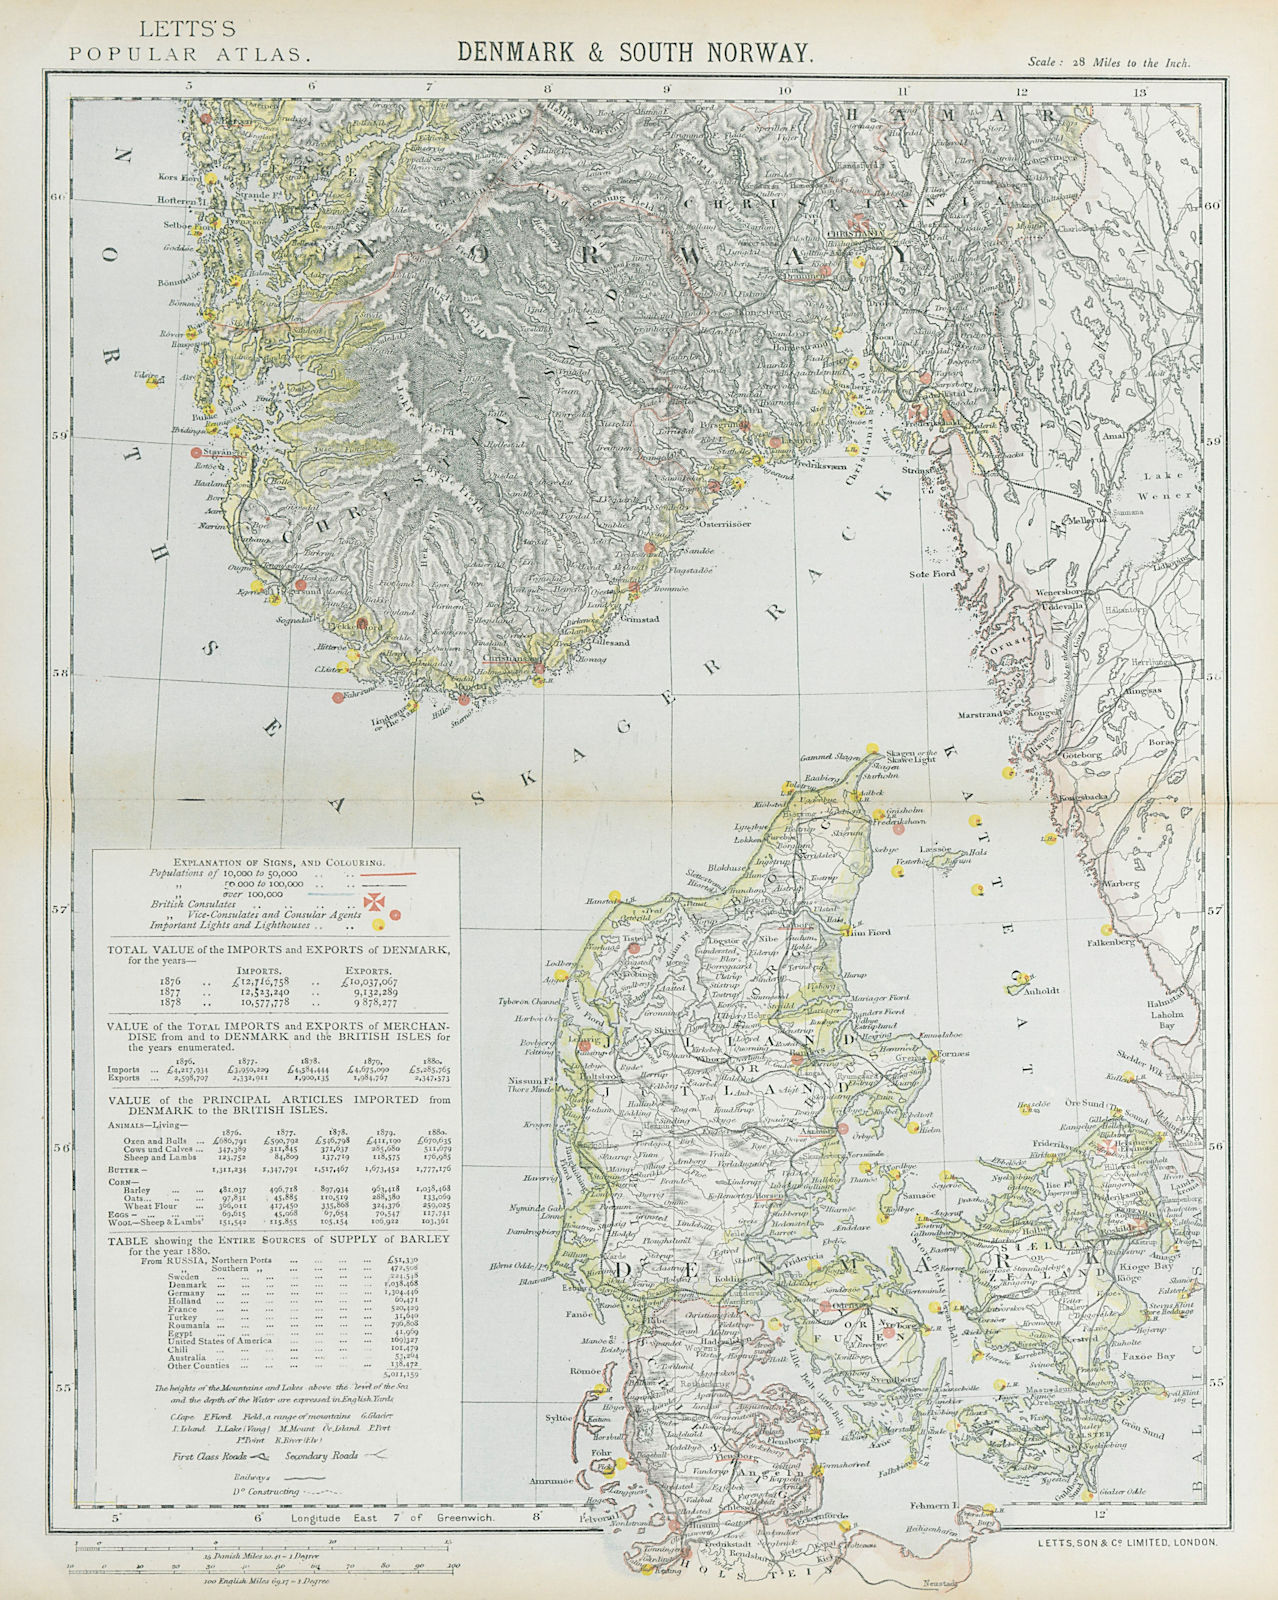 Associate Product SCANDINAVIA. Denmark & Southern Norway. Lighthouses Railways. LETTS 1883 map